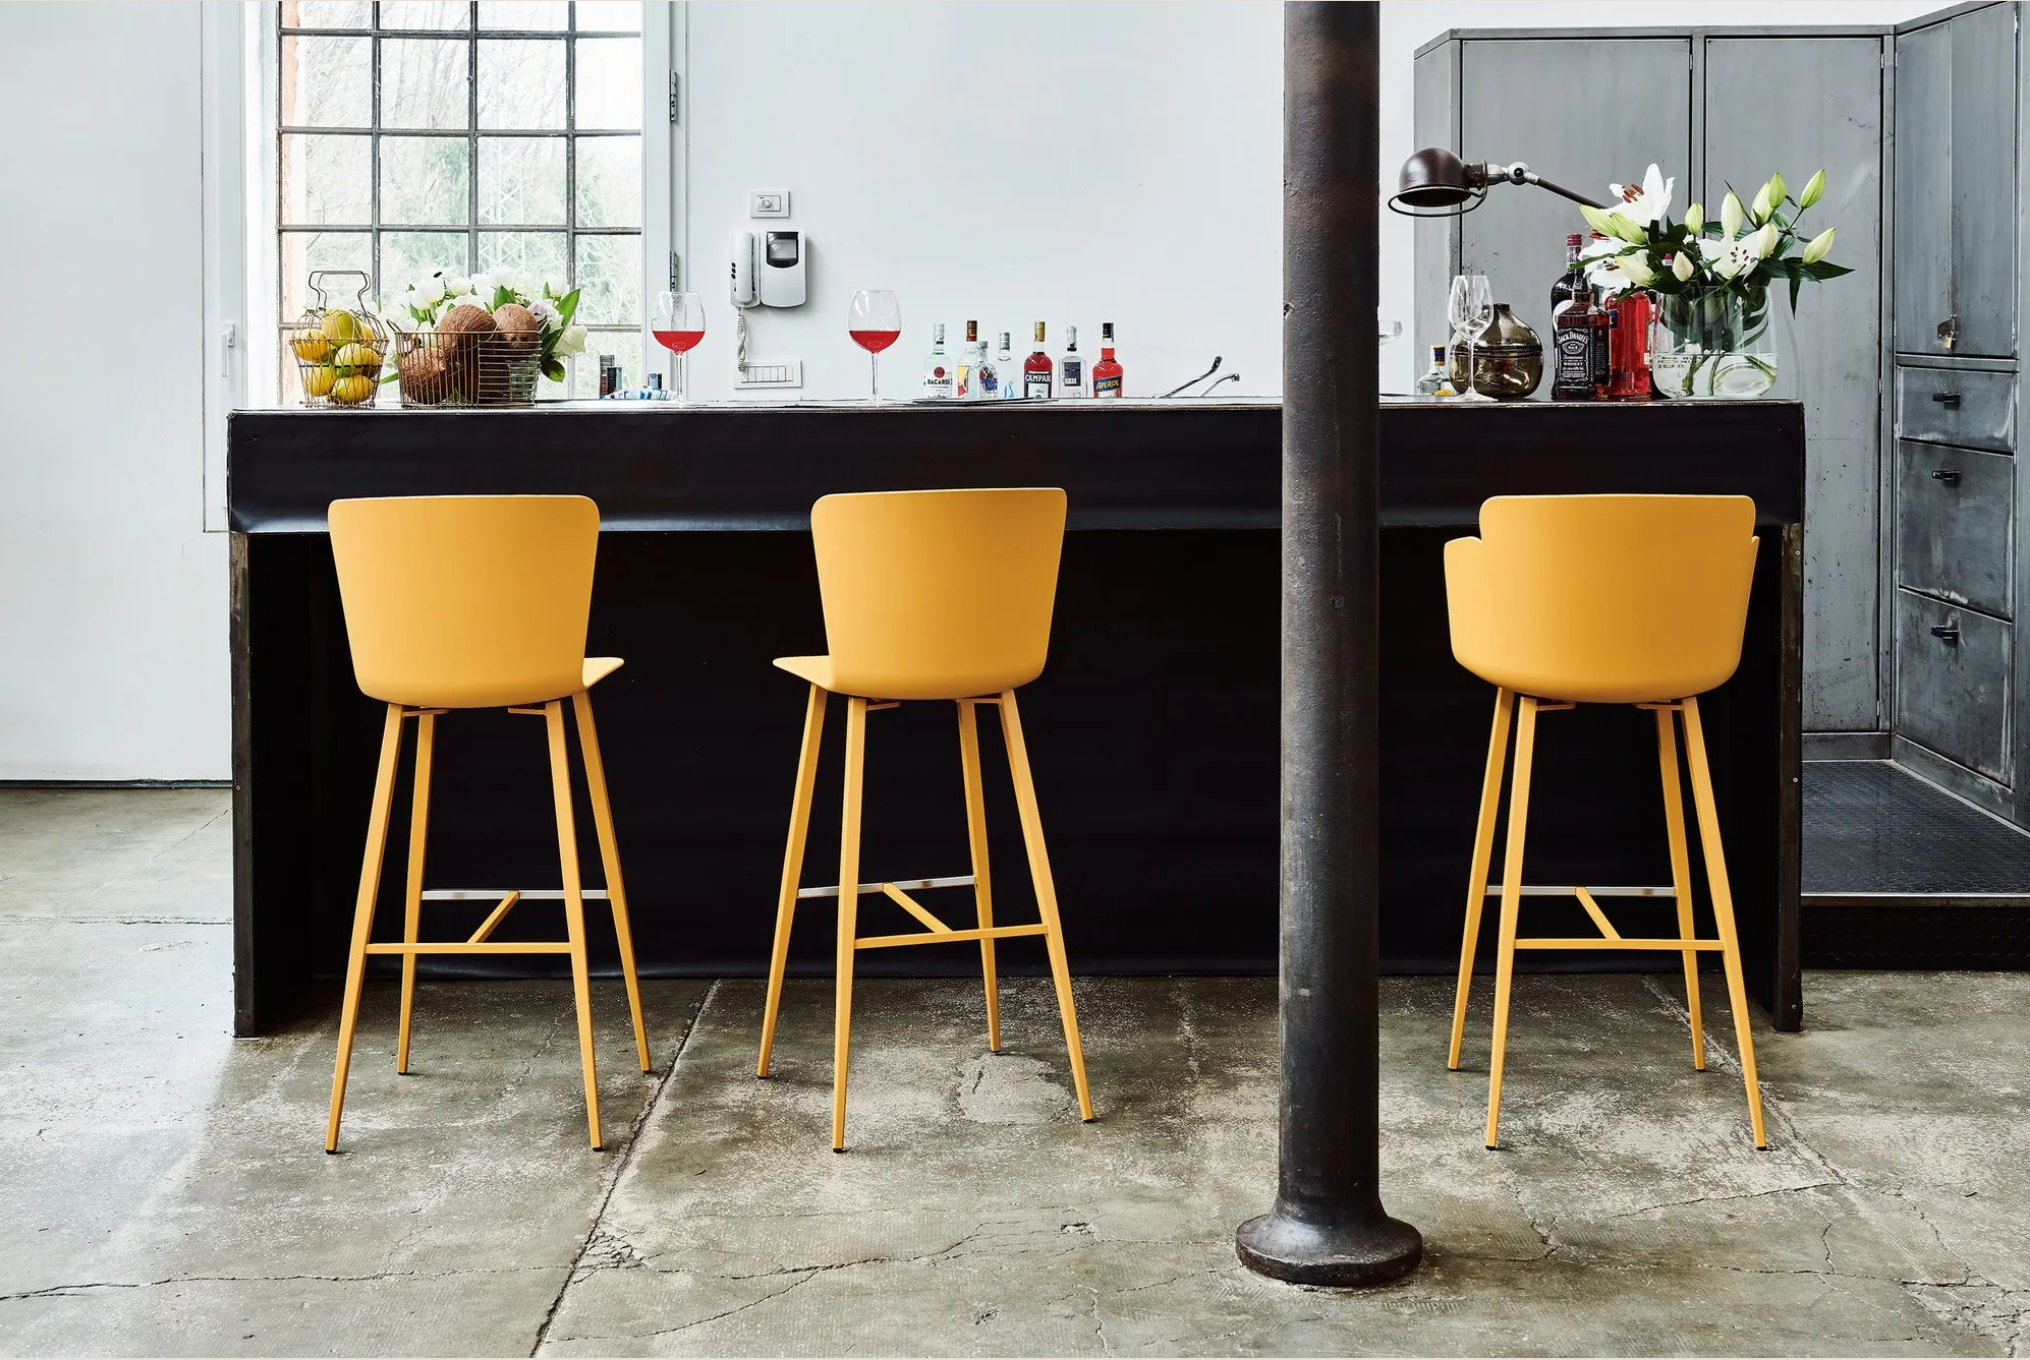 High-End Bar Stools: Add Luxury to Your Space